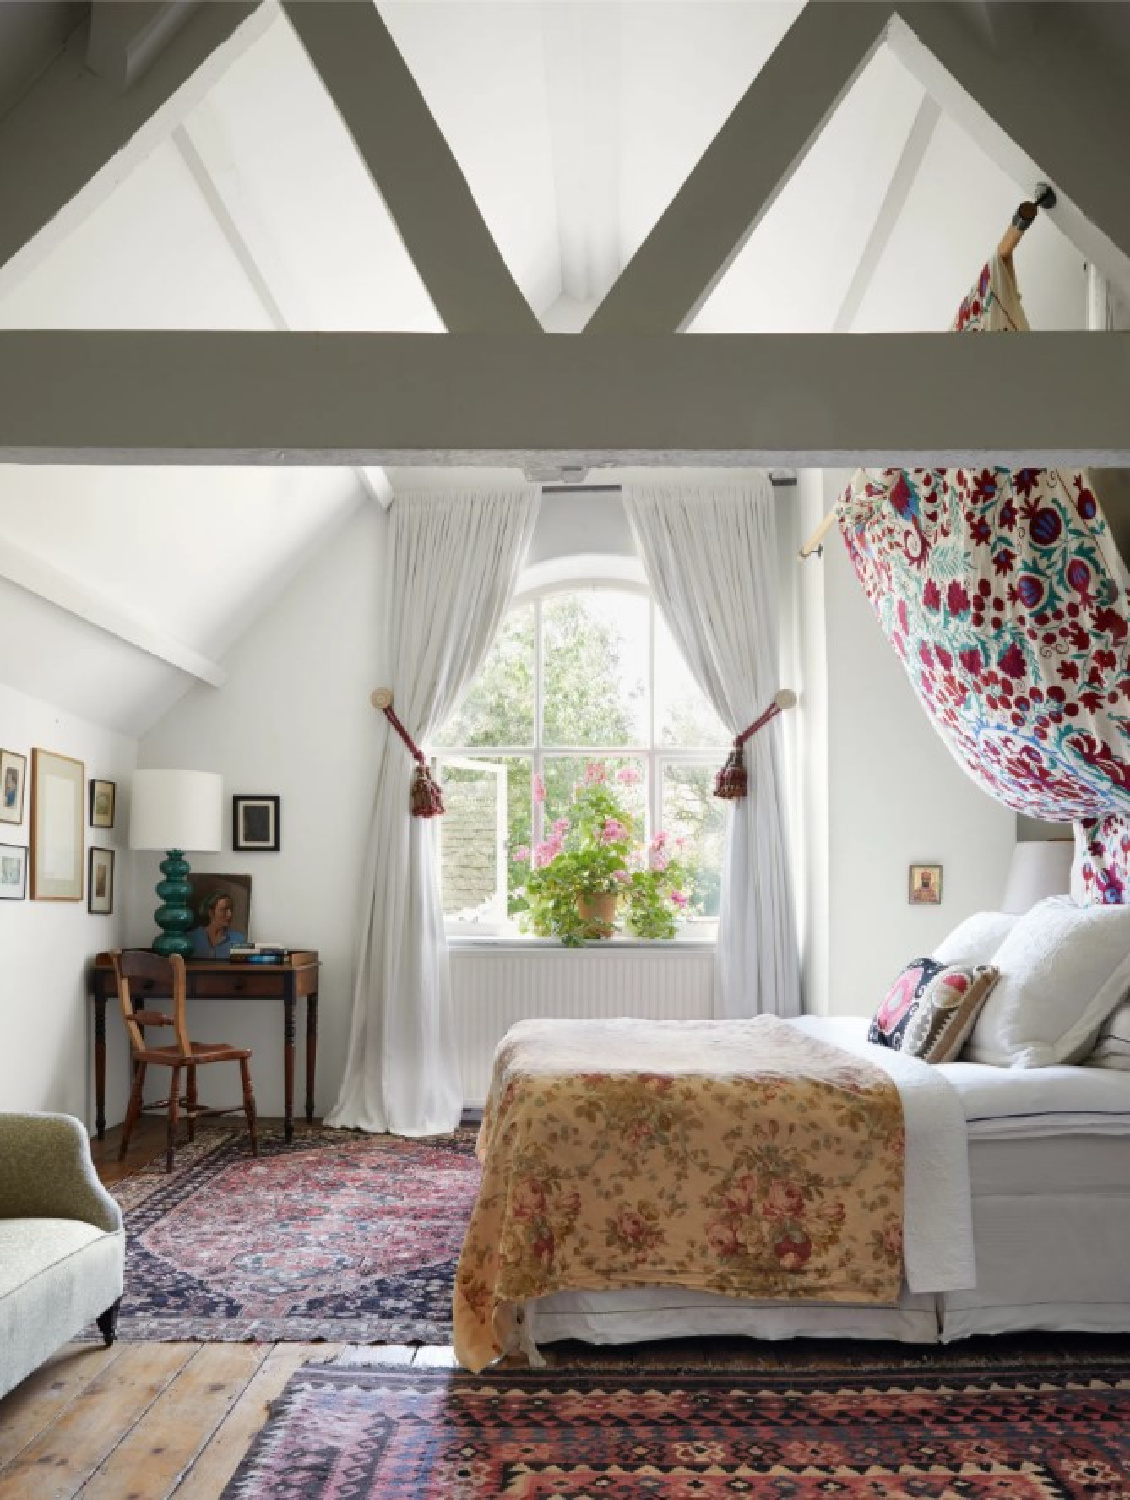 Beautiful bedroom with lofty ceiling at Cotswold home of Renshaw and Sarah Hiscox in HouseandGardenUK (photo Paul Massey). #cotswoldcottage #englishcountrystyle